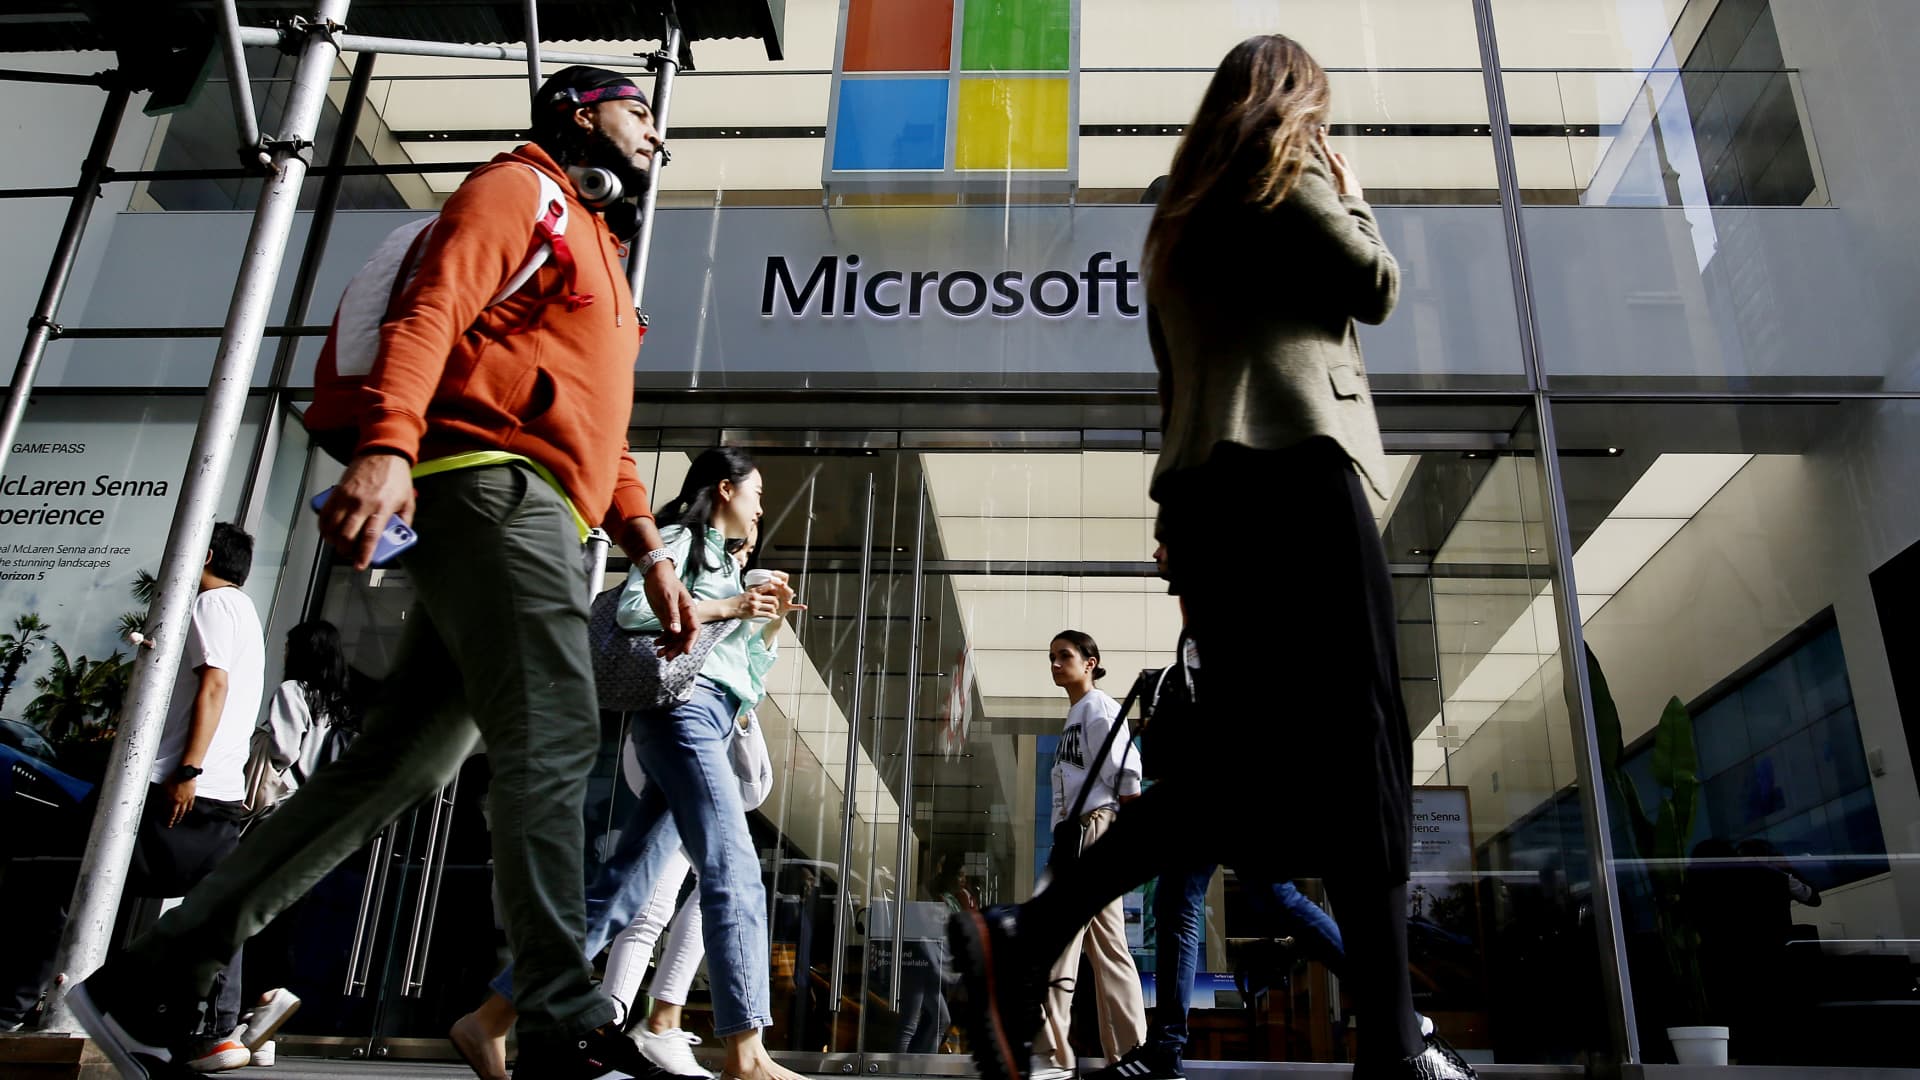 Buy Microsoft as latest investment can help it end Google’s search dominance, D.A. Davidson says